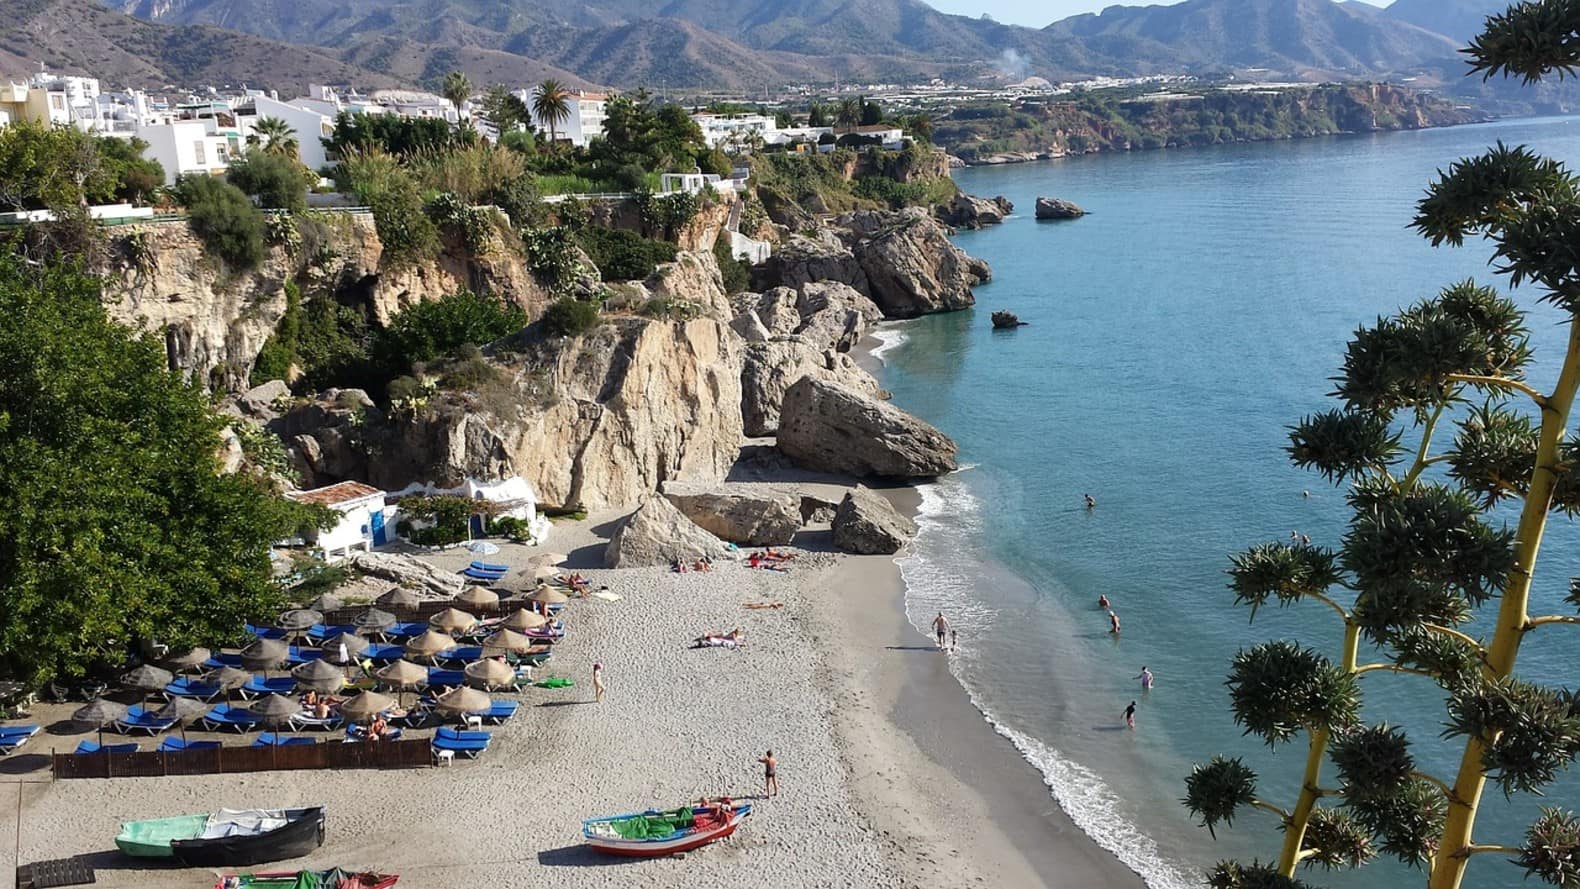 Find great Costa del Sol apartments to rent by Nerja's stunning beaches